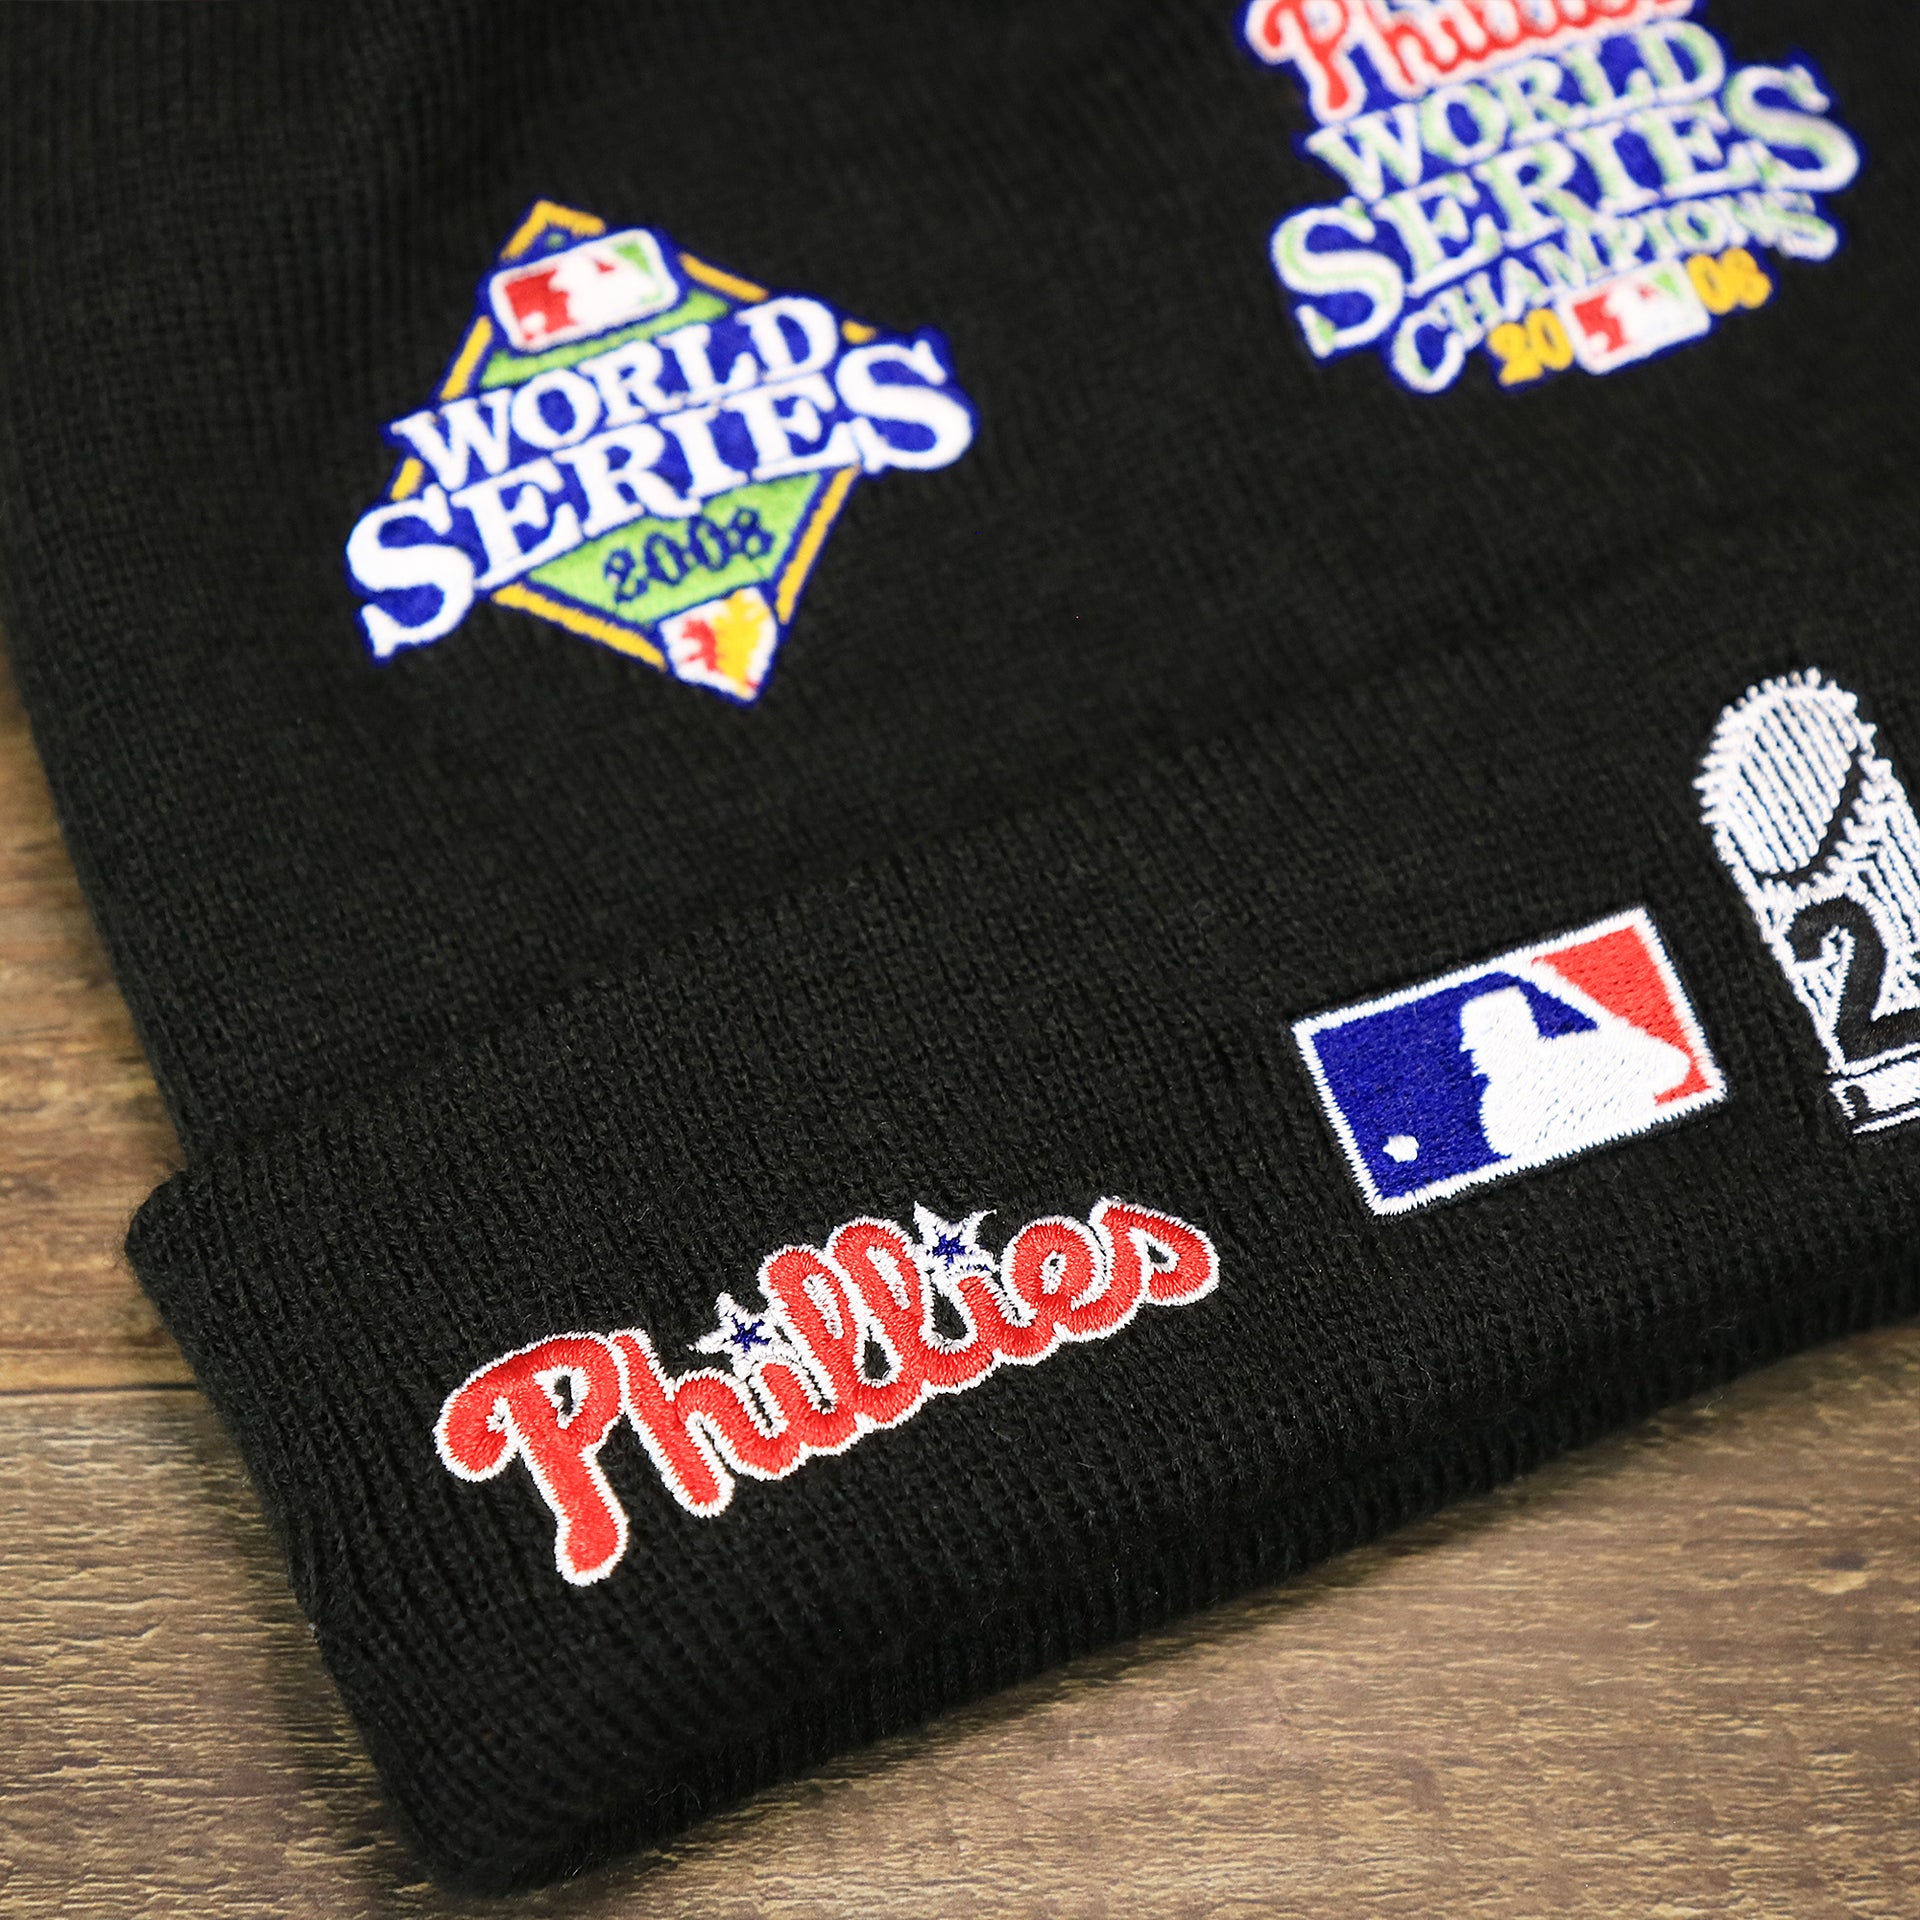 The Phillies Wordmark on the Philadelphia Phillies All Over World Series Side Patch 2x Champion Knit Cuff Beanie | New Era, Black